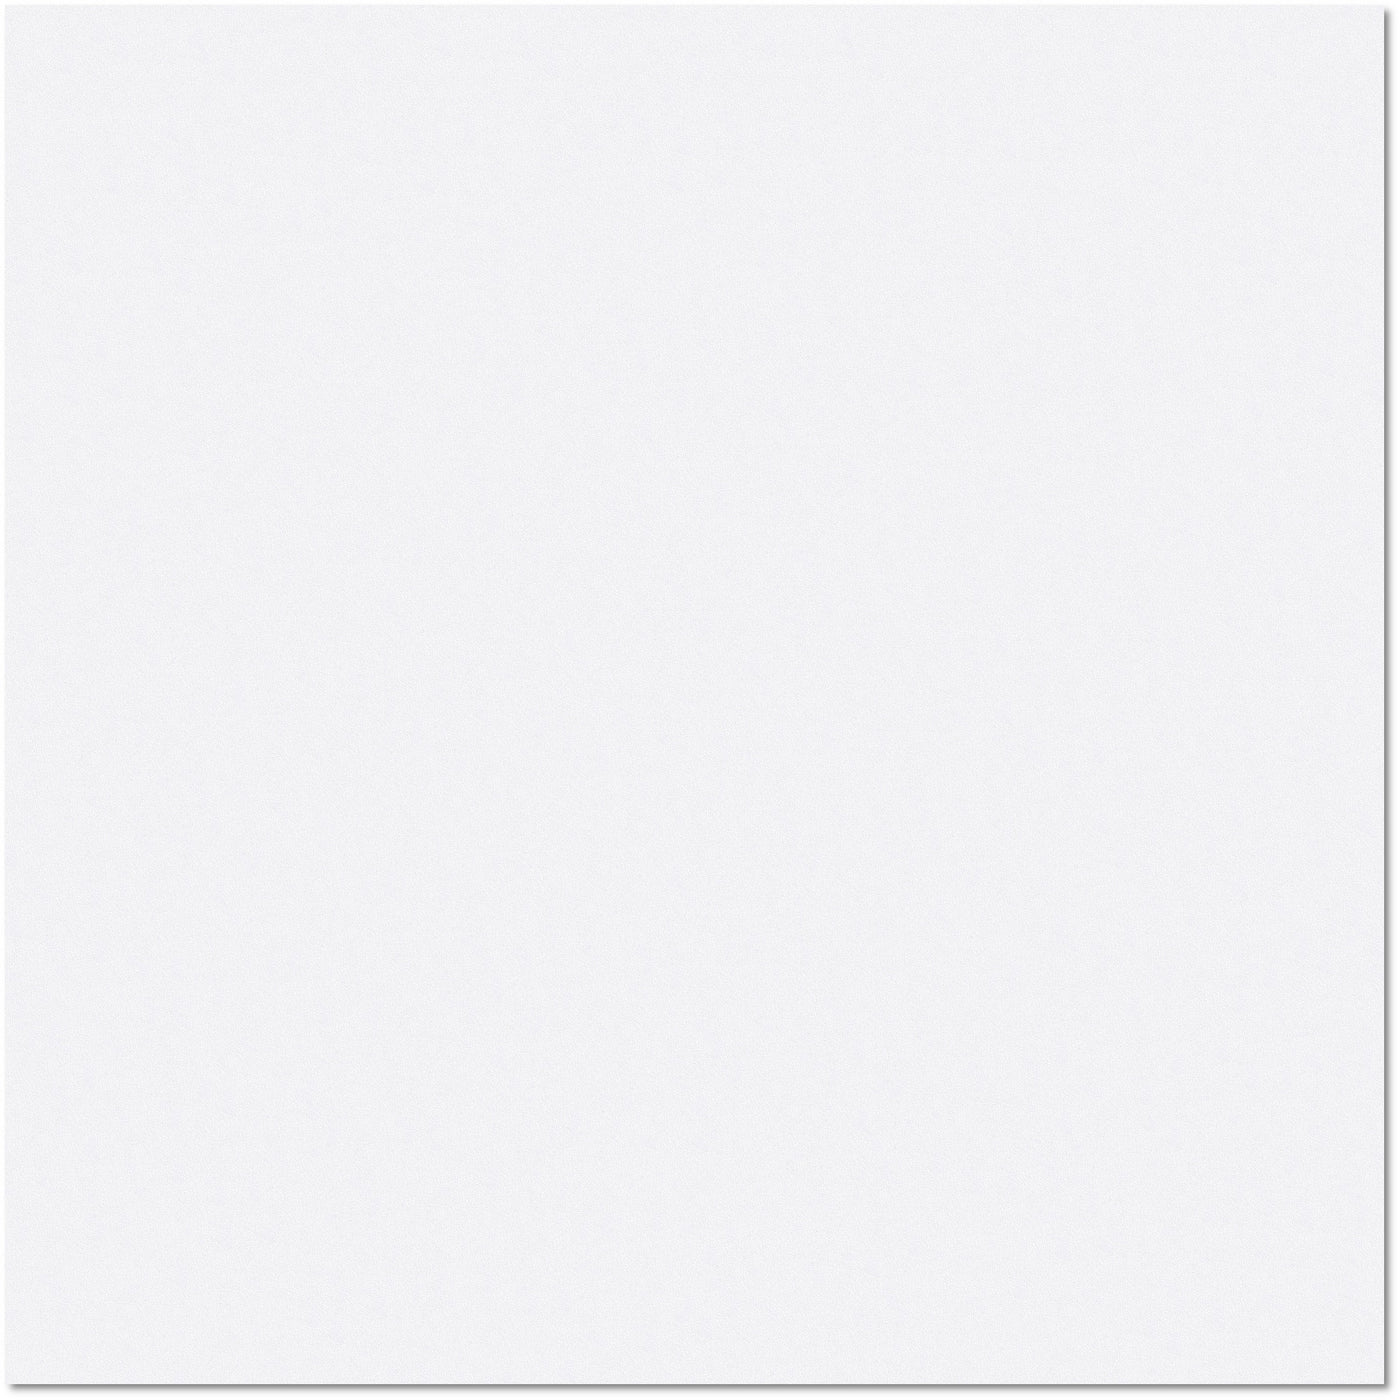 WHITE - smooth, white 12x12 cardstock - 225 gsm - cuts great - Lessebo Paper